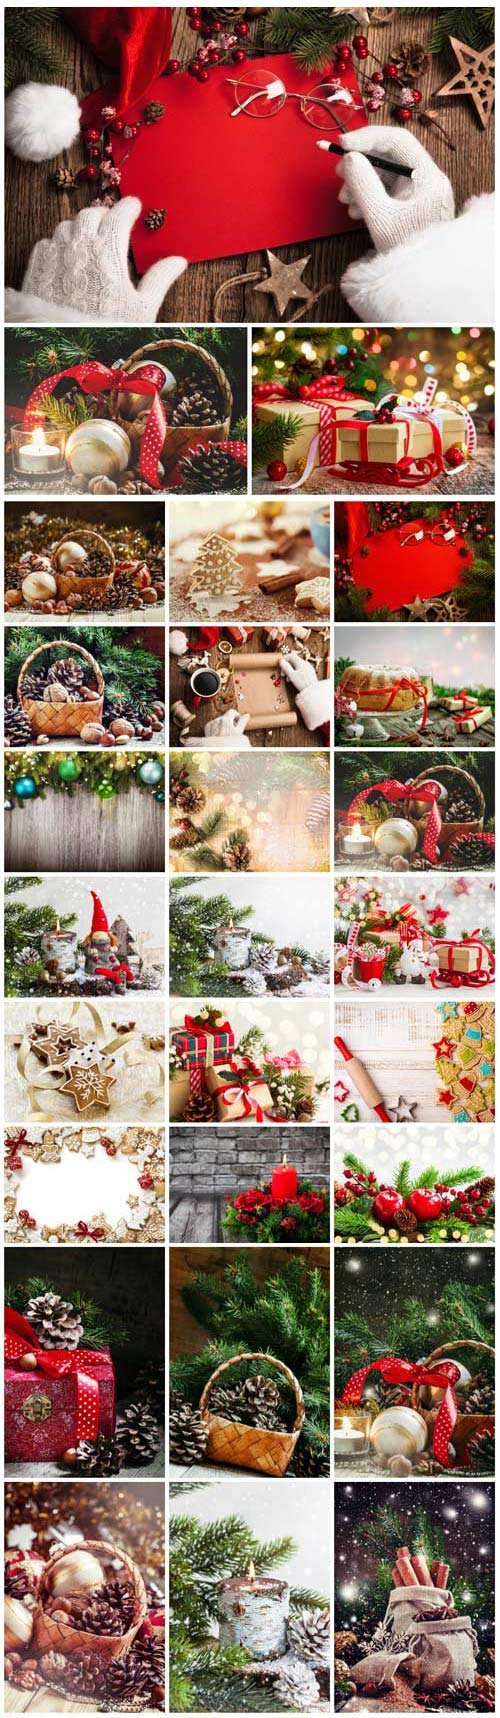 New Year and Christmas stock photos №27